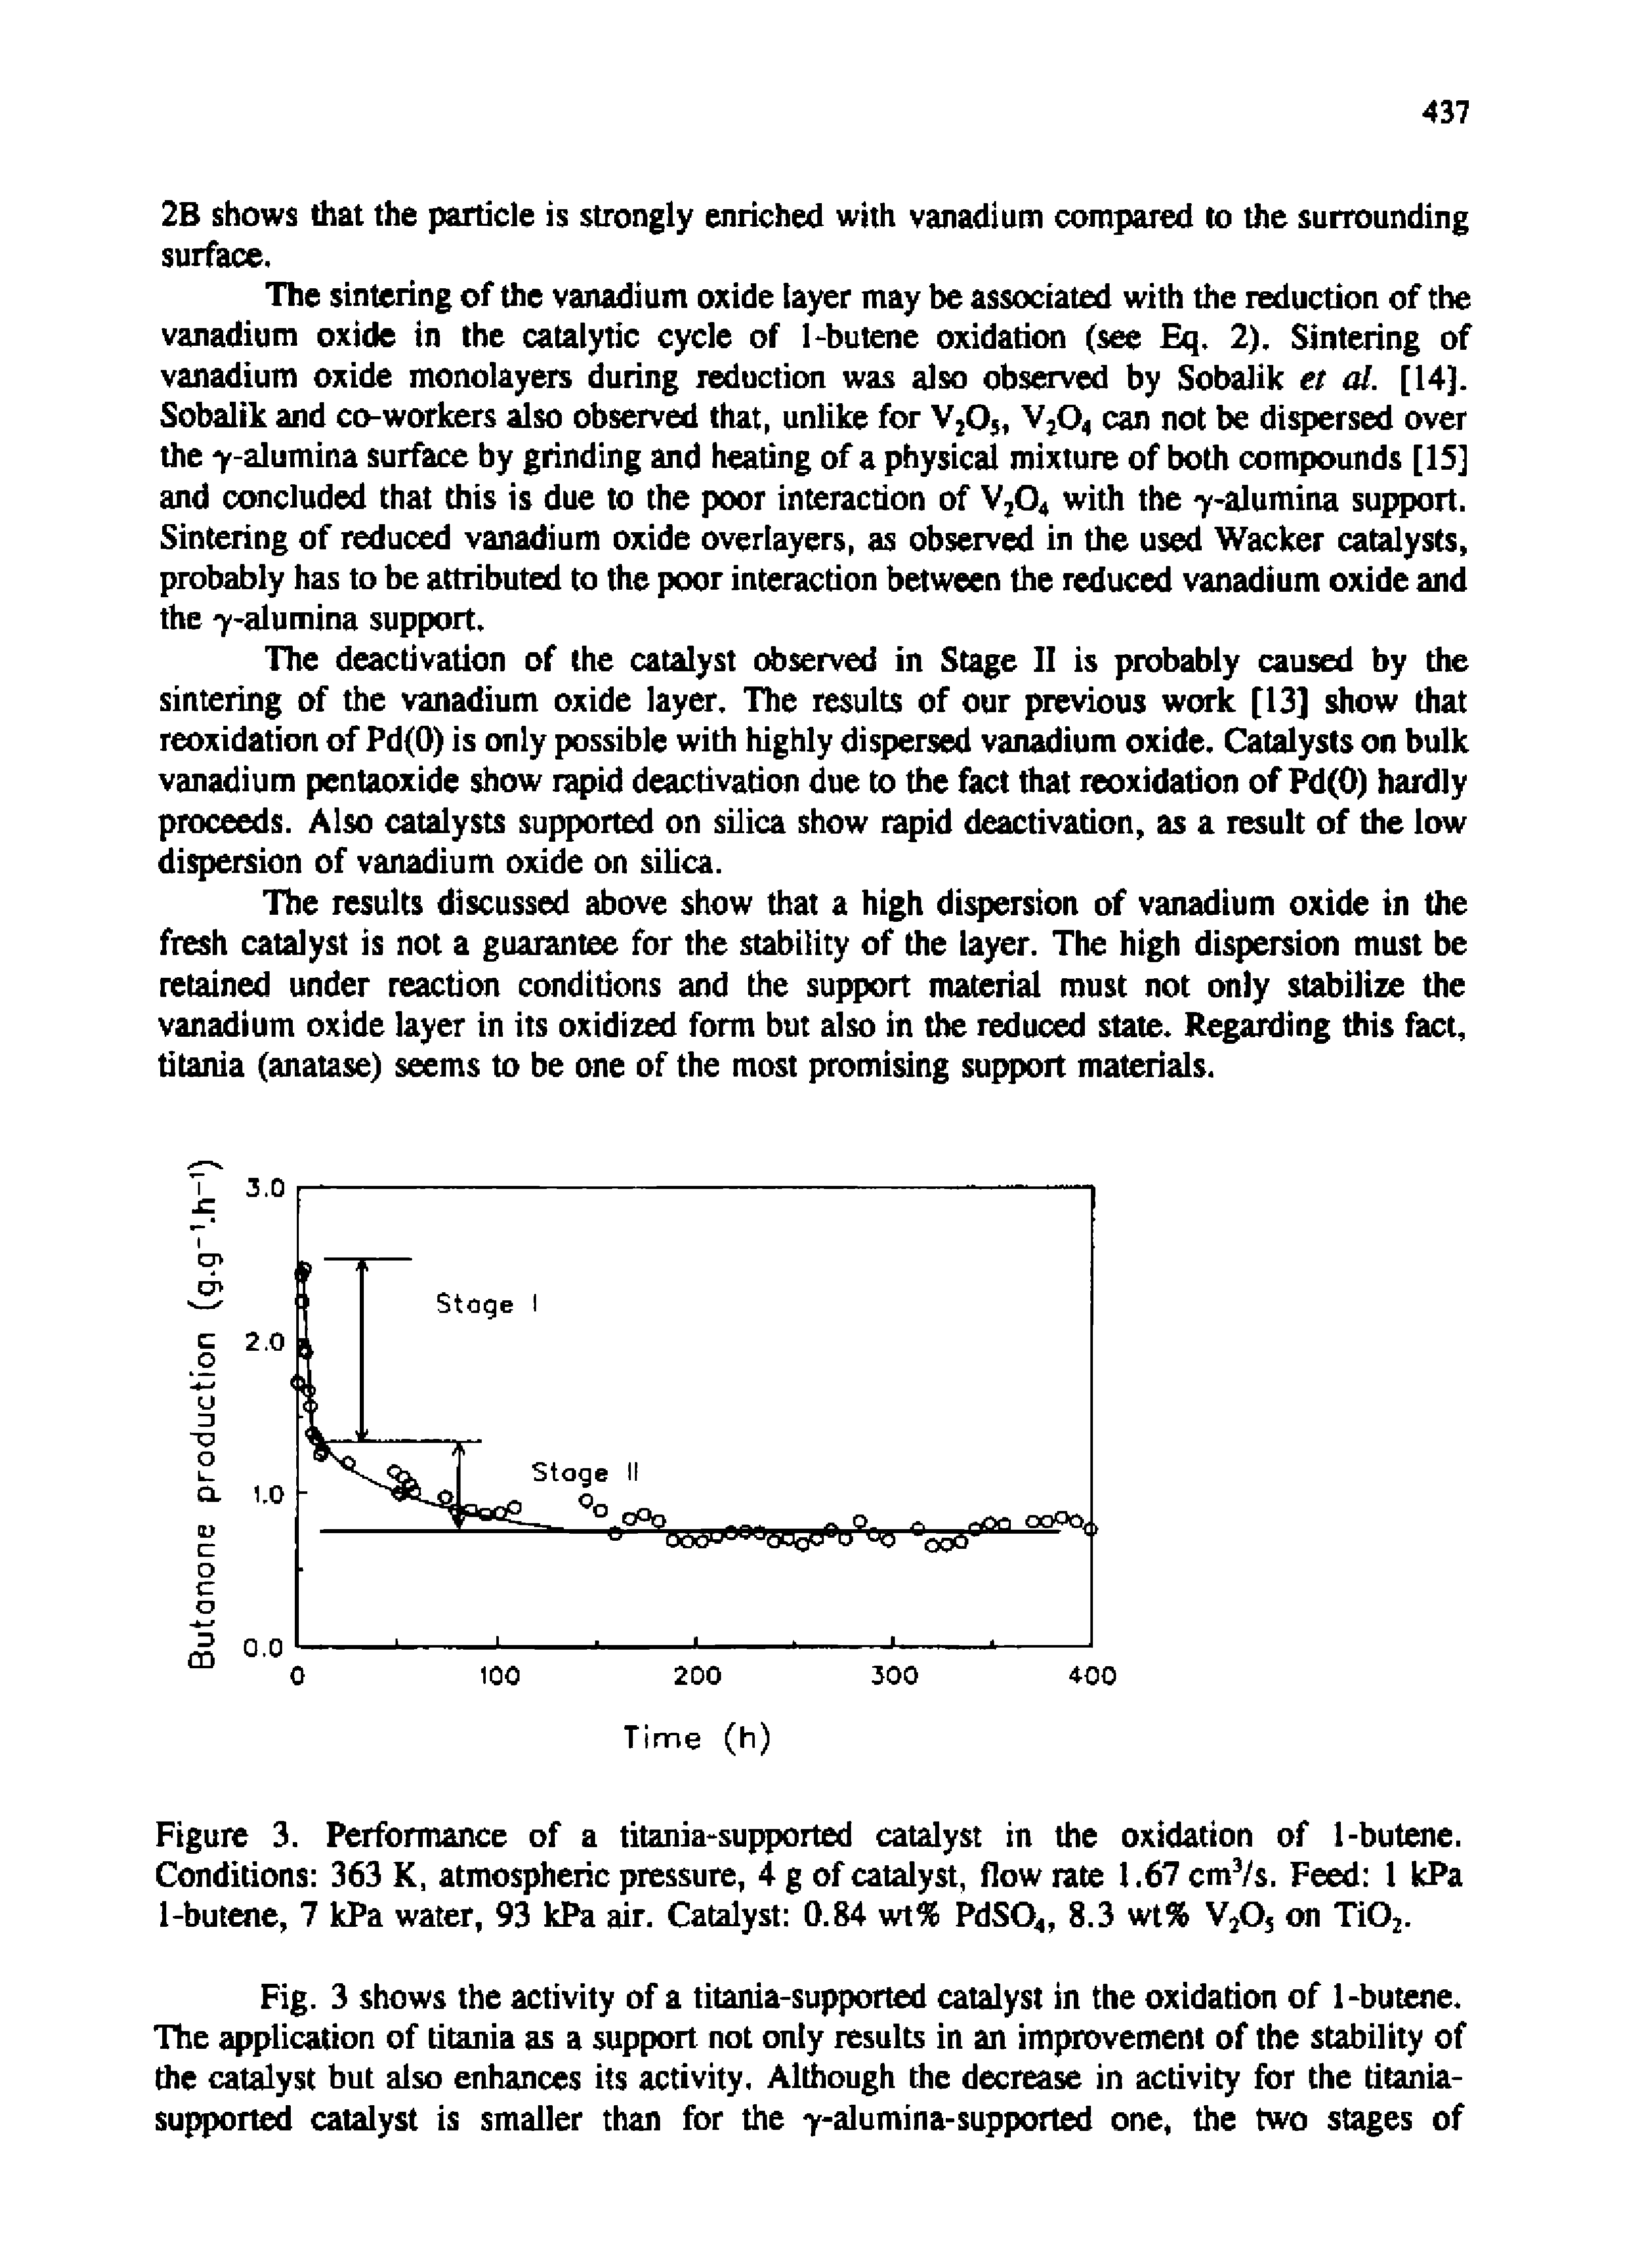 Figure 3. Performance of a titania-supported catalyst in the oxidation of 1-butene. Conditions 363 K, atmospheric pressure, 4 g of catalyst, flow rate 1.67 cm3/s. Feed 1 kPa 1-butene, 7 kPa water, 93 kPa air. Catalyst 0.84 wt% PdS04, 8.3 wt% V2Os on Ti02.